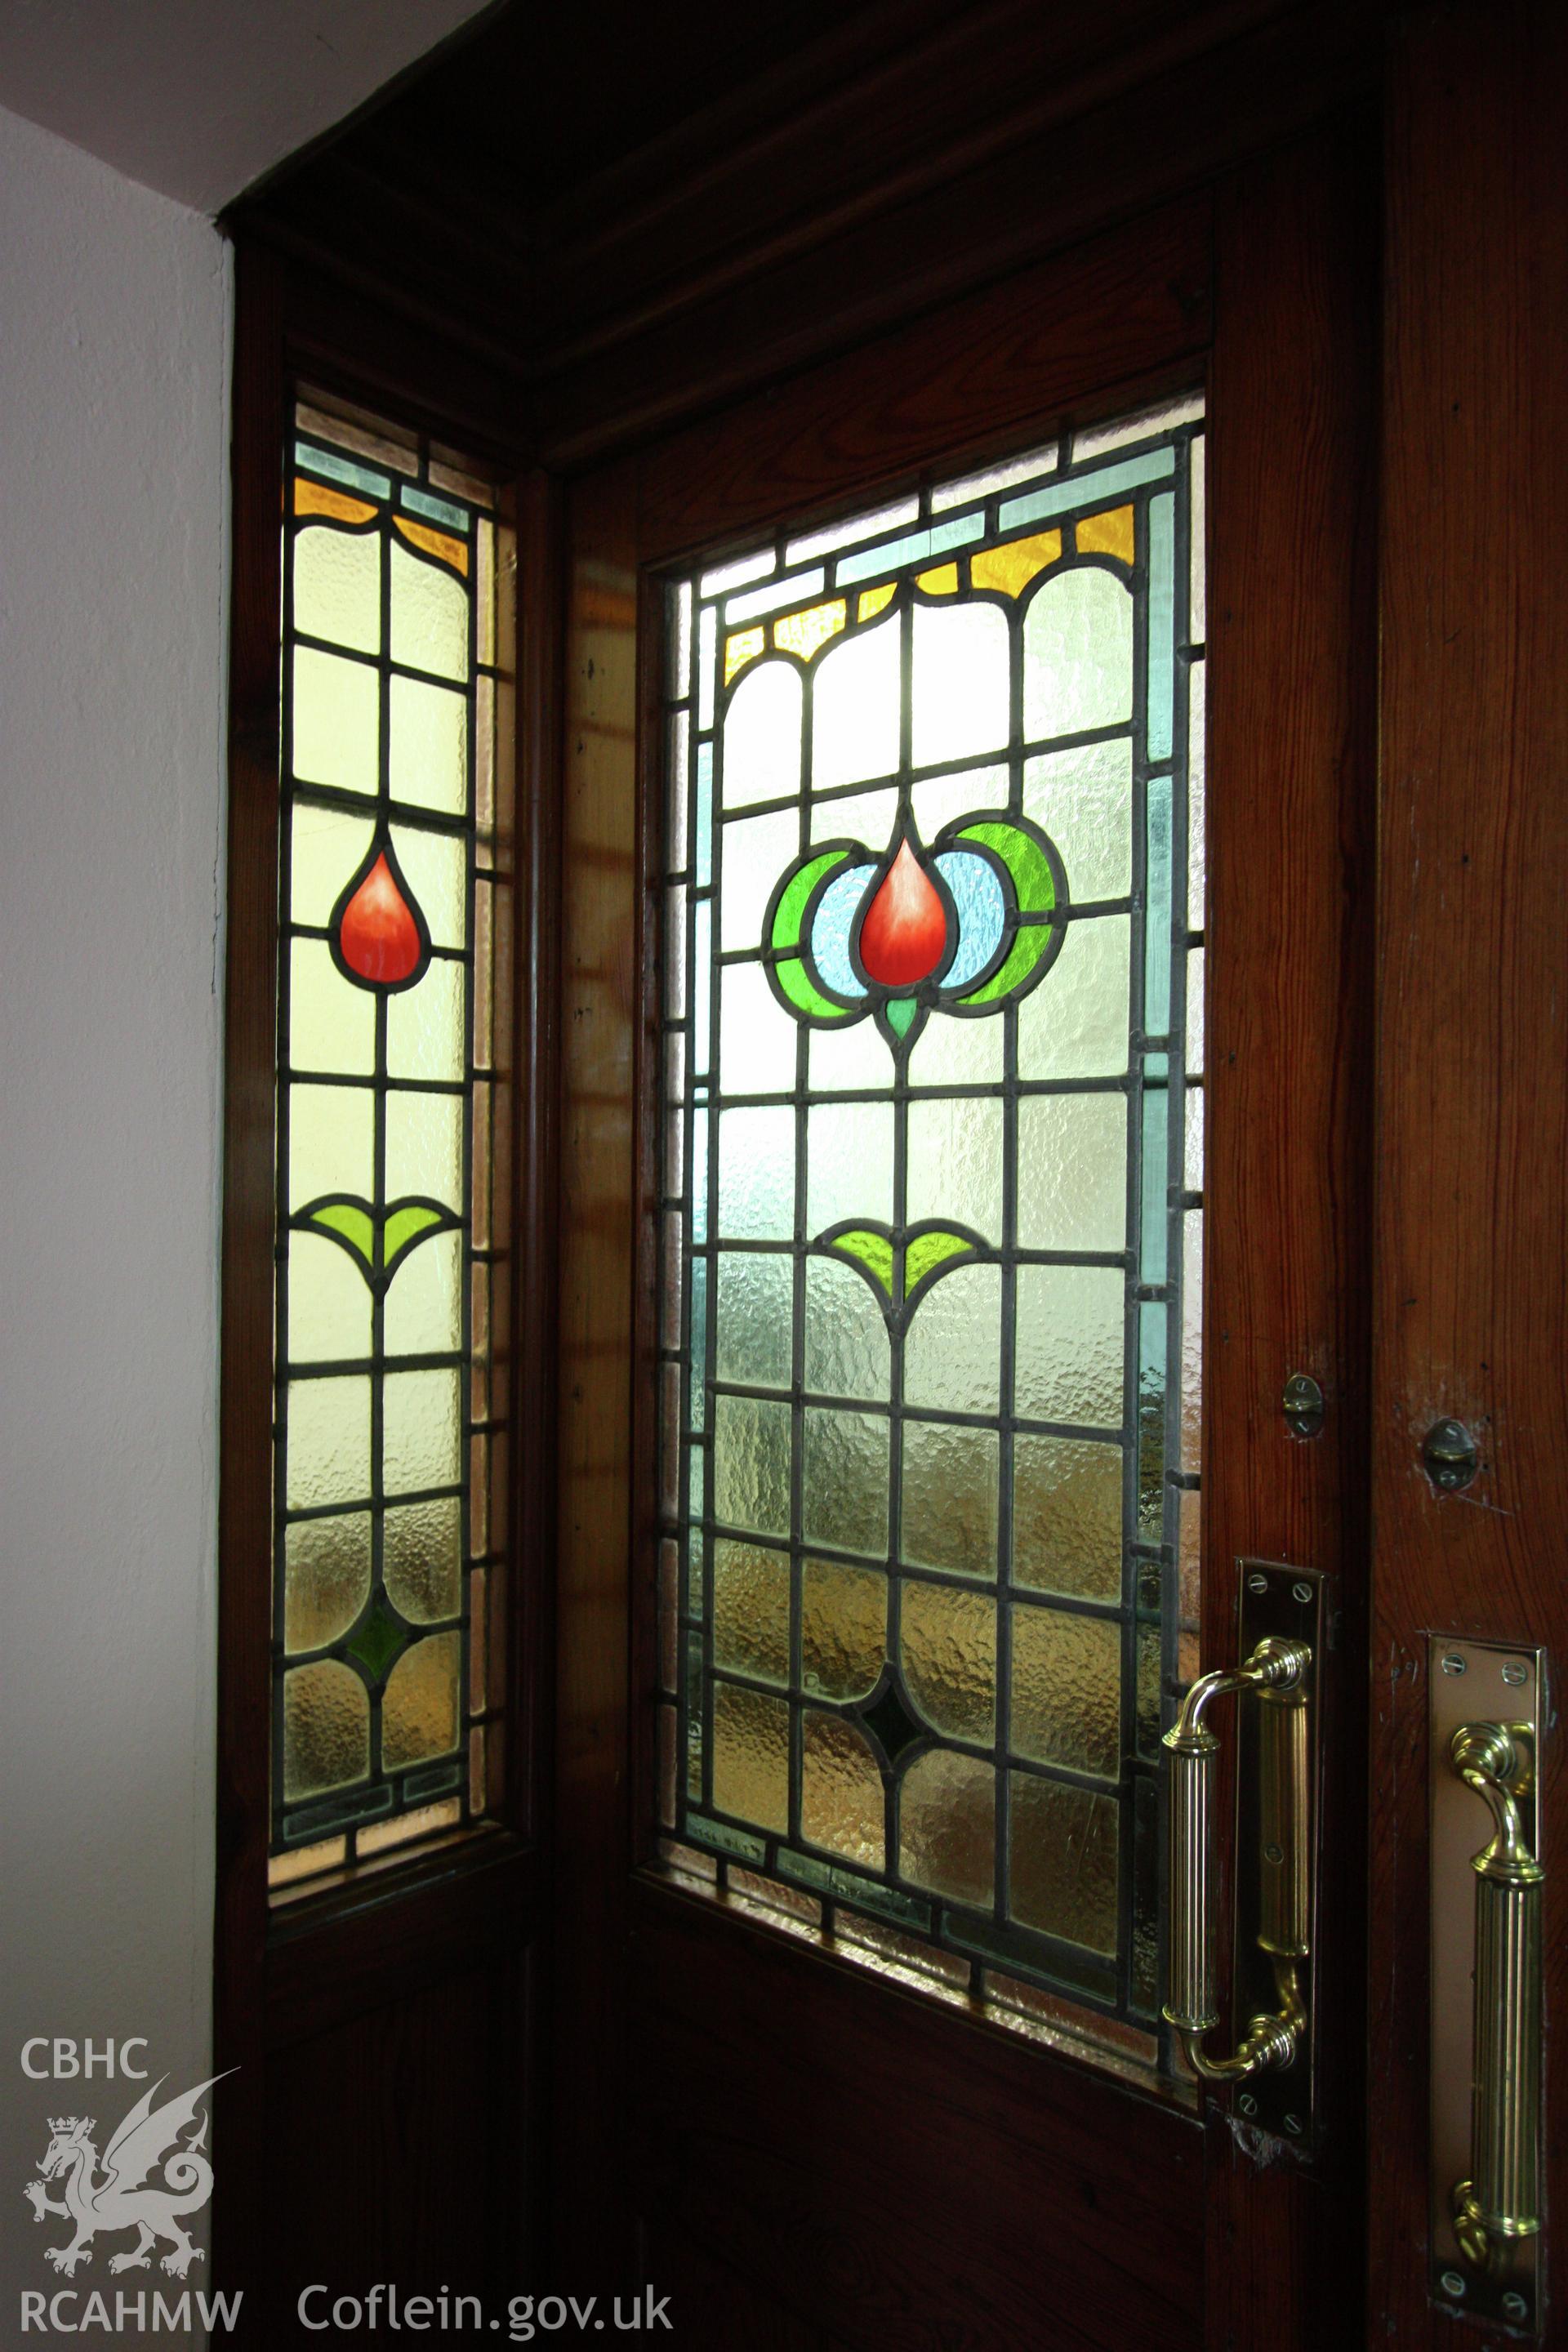 Bethel Baptist chapel, detailed of stained glass in entrance.